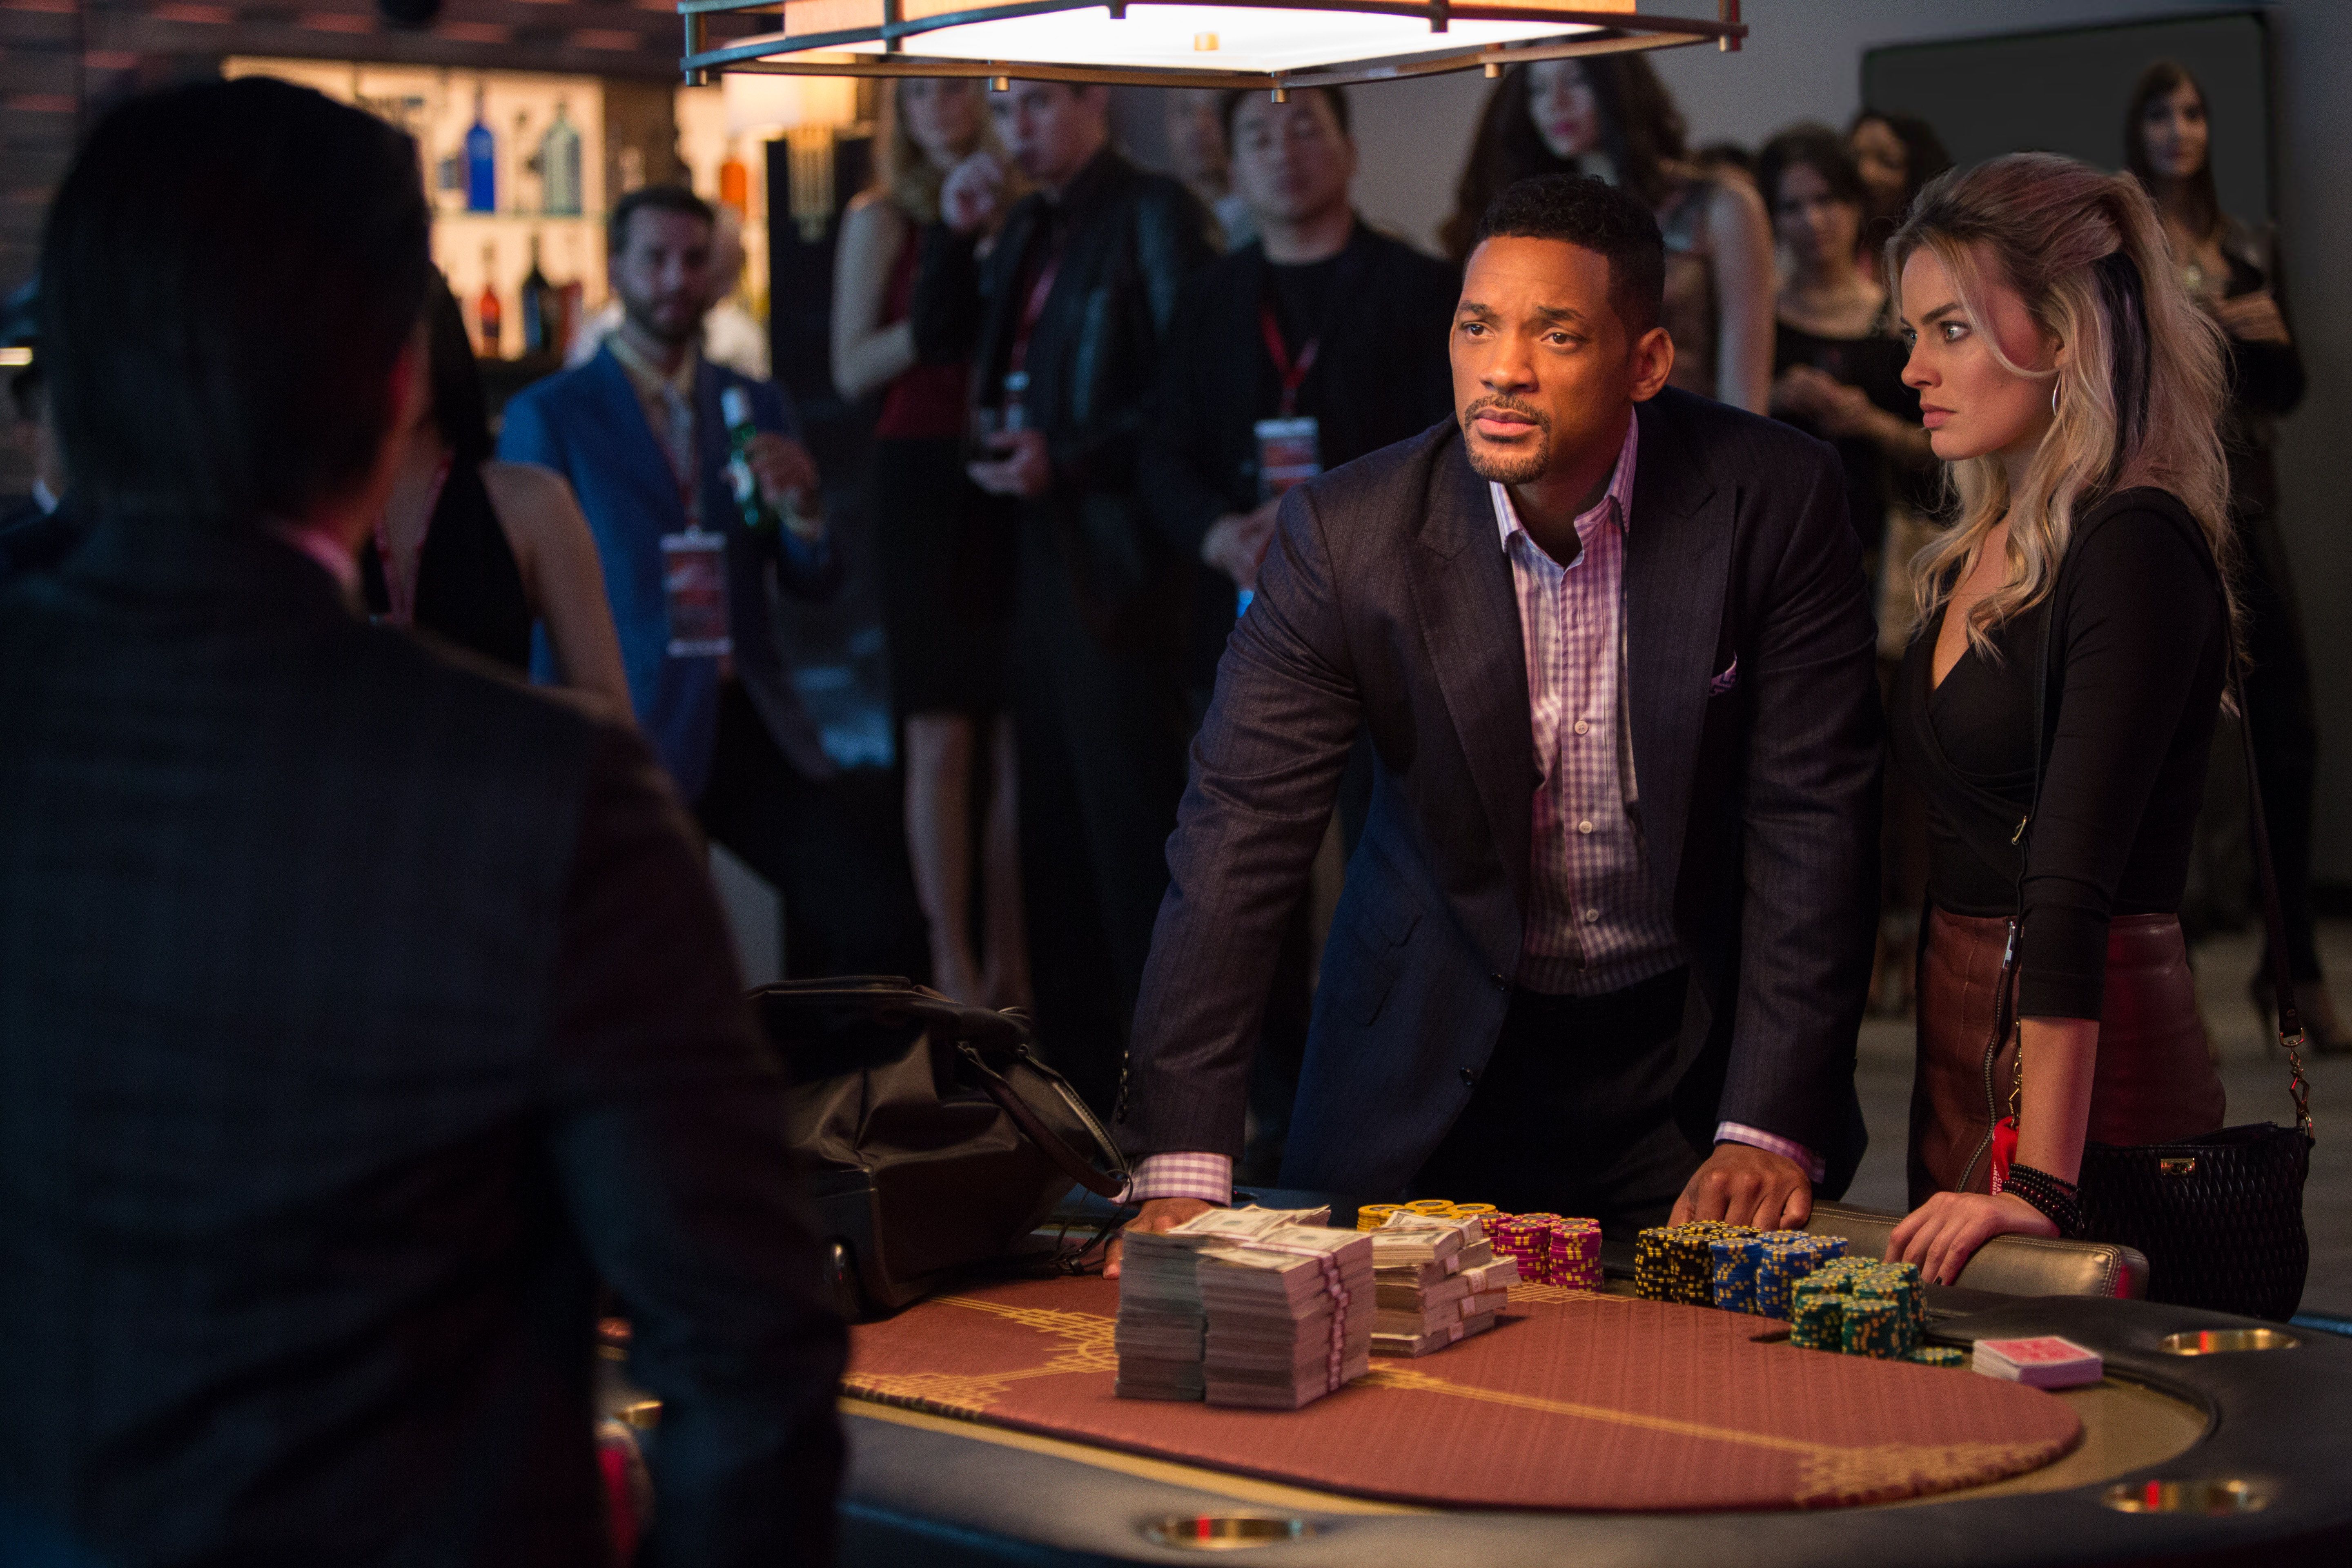 'Focus' Clips and Behind-the-Scenes Footage Starring Will Smith and Margot Robbie ...